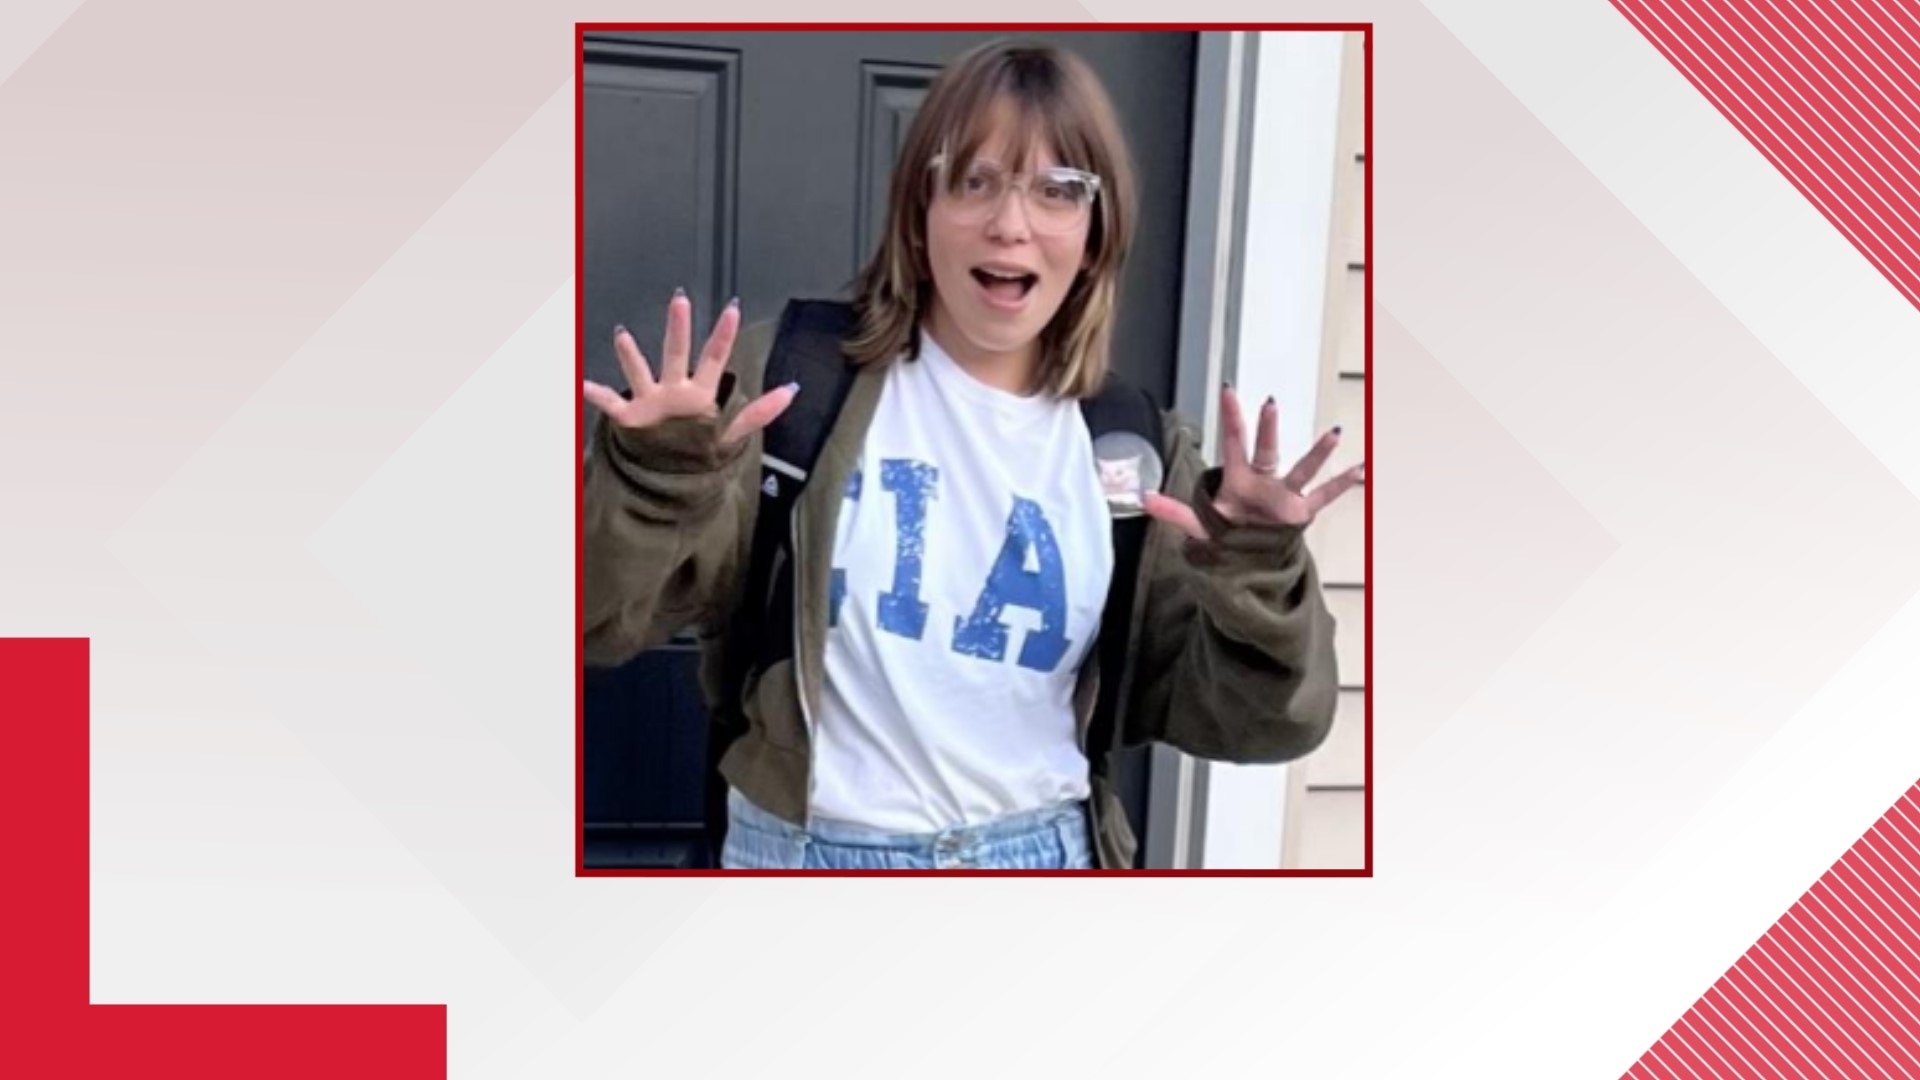 According to the Polk County Sheriff's Office, 12-year-old Claire Marie Orr left home on Sunday, Sept. 17. She was last seen in the Birdland Park area of Des Moines.